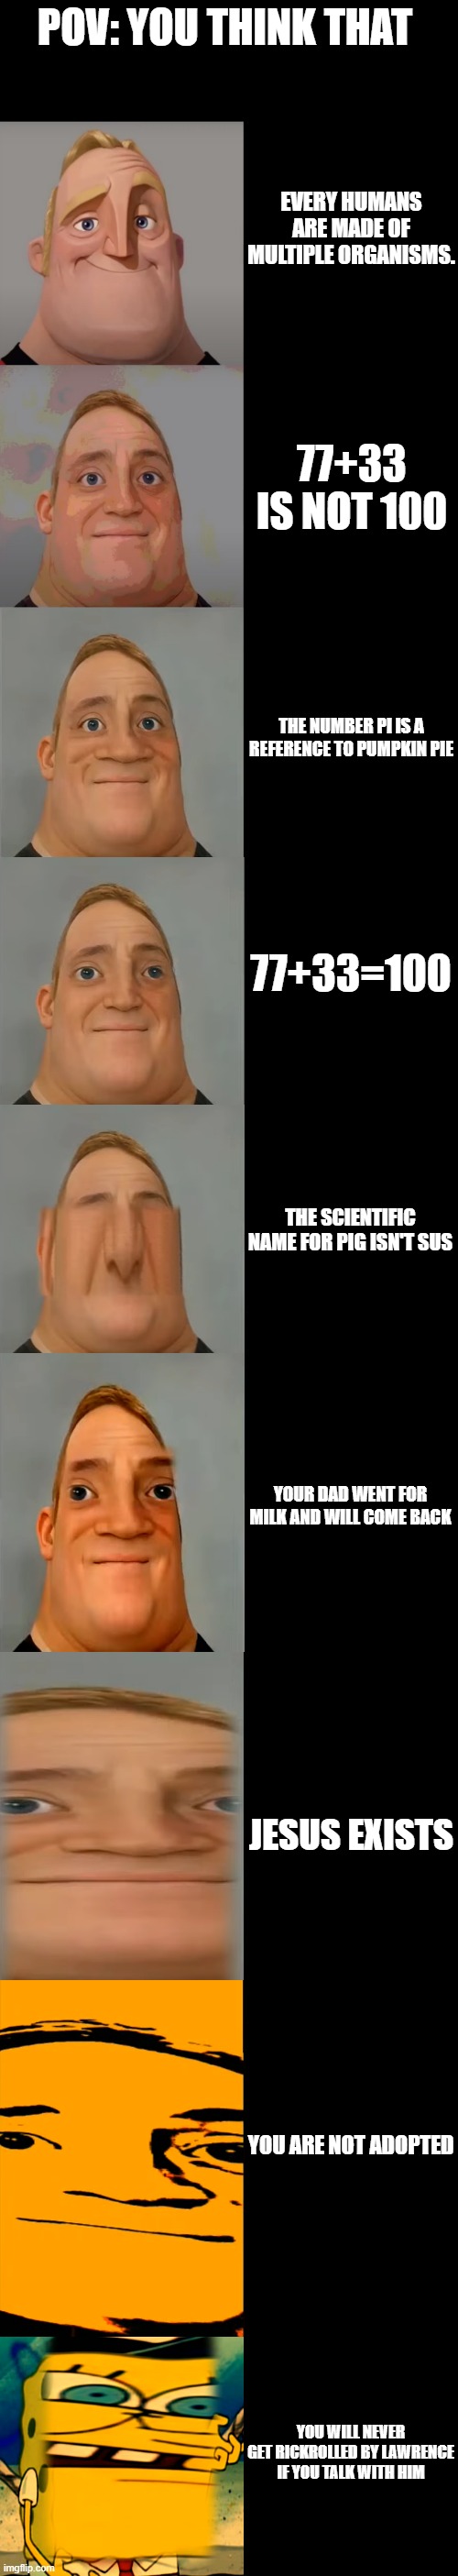 Mr Incredible becoming Idiot template | POV: YOU THINK THAT; EVERY HUMANS ARE MADE OF MULTIPLE ORGANISMS. 77+33 IS NOT 100; THE NUMBER PI IS A REFERENCE TO PUMPKIN PIE; 77+33=100; THE SCIENTIFIC NAME FOR PIG ISN'T SUS; YOUR DAD WENT FOR MILK AND WILL COME BACK; JESUS EXISTS; YOU ARE NOT ADOPTED; YOU WILL NEVER GET RICKROLLED BY LAWRENCE IF YOU TALK WITH HIM | image tagged in mr incredible becoming idiot template | made w/ Imgflip meme maker